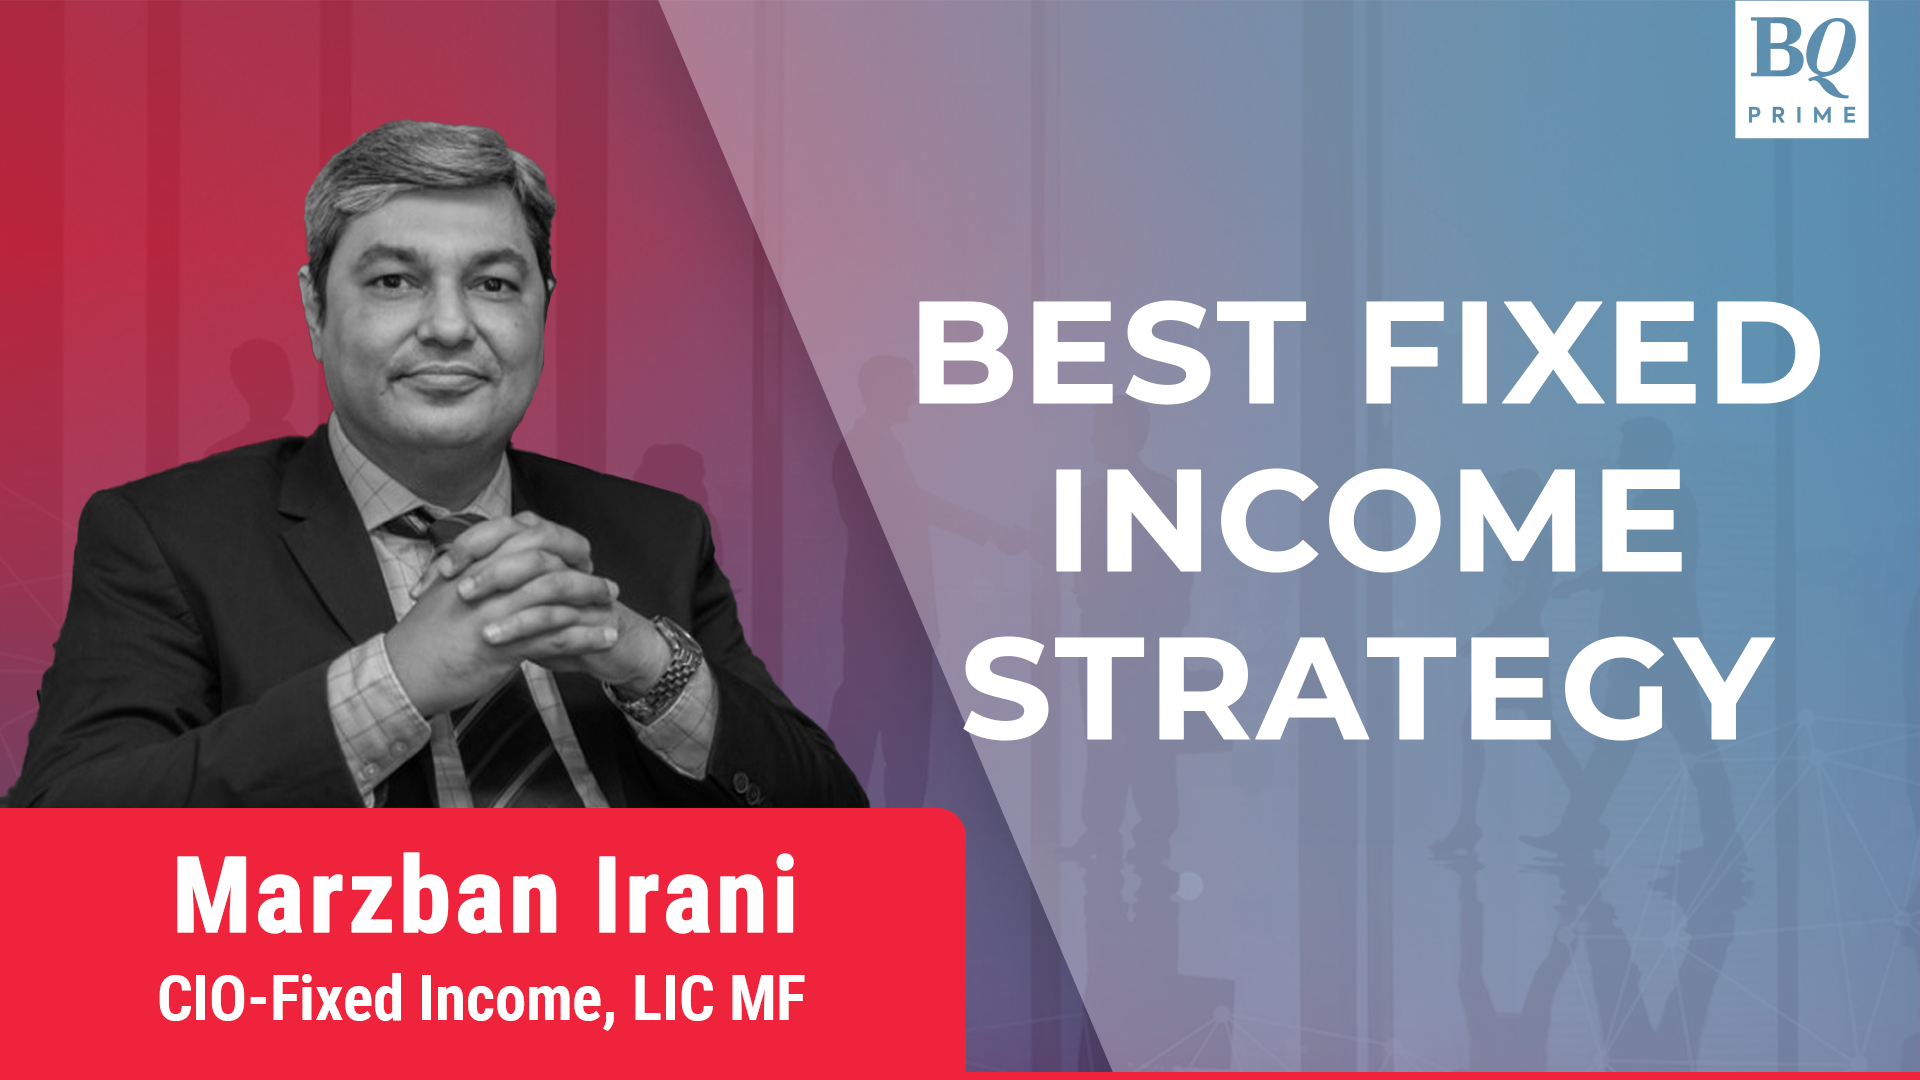 Best Fixed Income Strategy For Retail Investors | BQ Prime